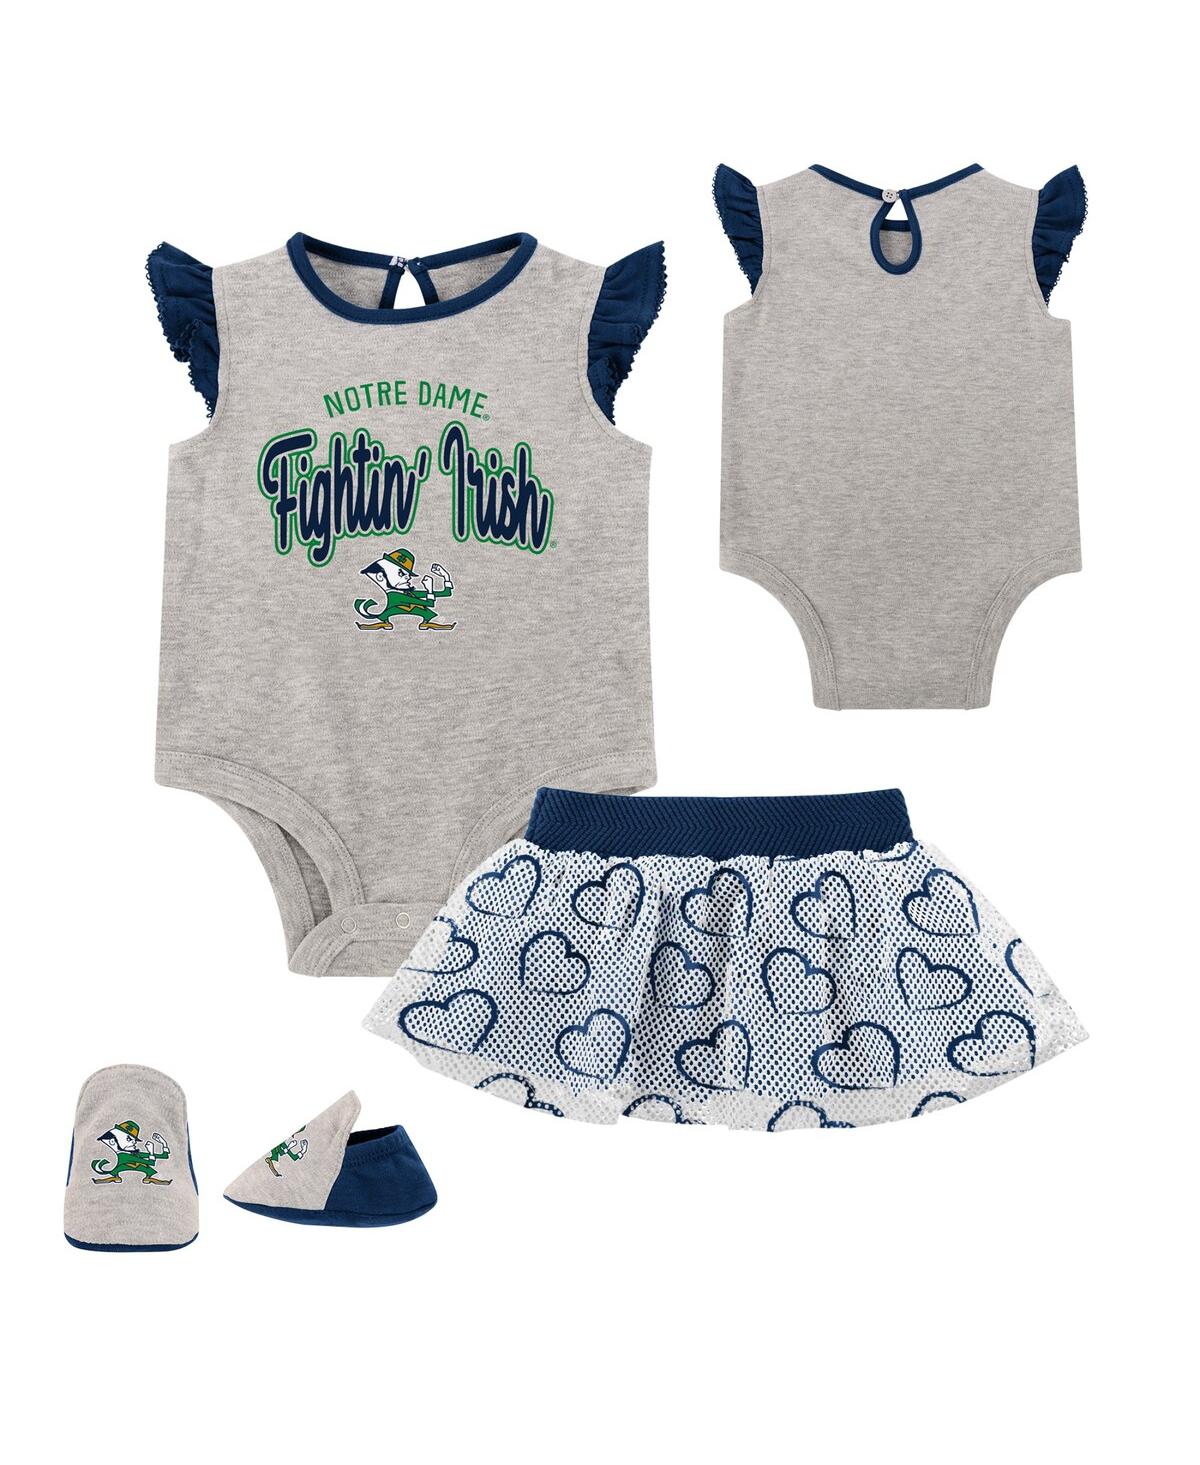 Outerstuff Babies' Girls Newborn Heather Gray Notre Dame Fighting Irish All Dolled Up Bodysuit, Skirt And Bootie Set